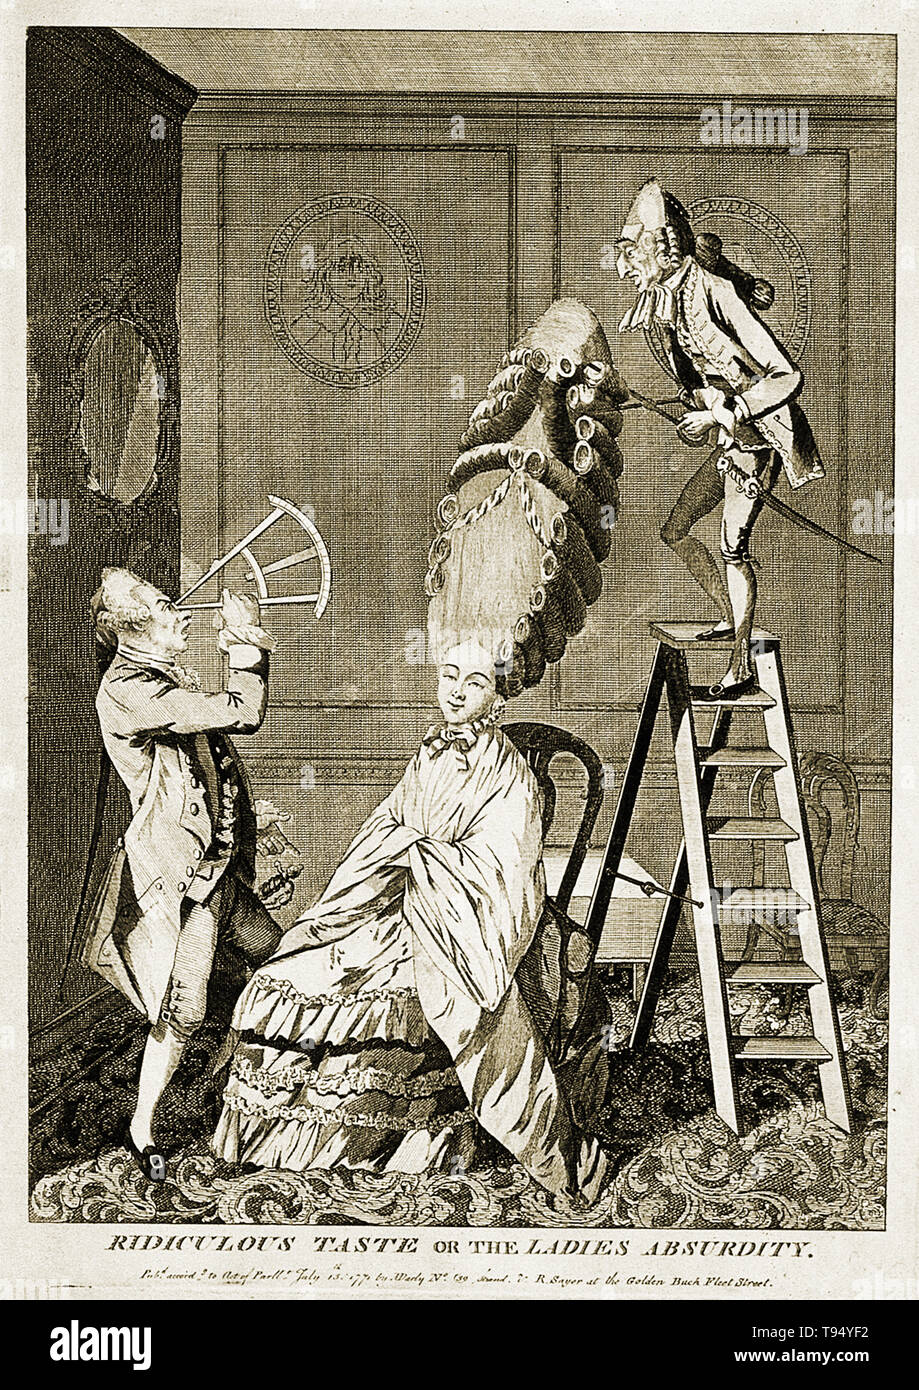 'Ridiculous Taste or the Ladies Absurdity': An 18th-century English engraving of a stylish woman having her exceptionally high wig dressed by a French hairdresser (on stepladder); the woman's husband, a naval officer, is holding a sextant to his eye to ascertain the altitude of the adornment. Print from 1771. Stock Photo